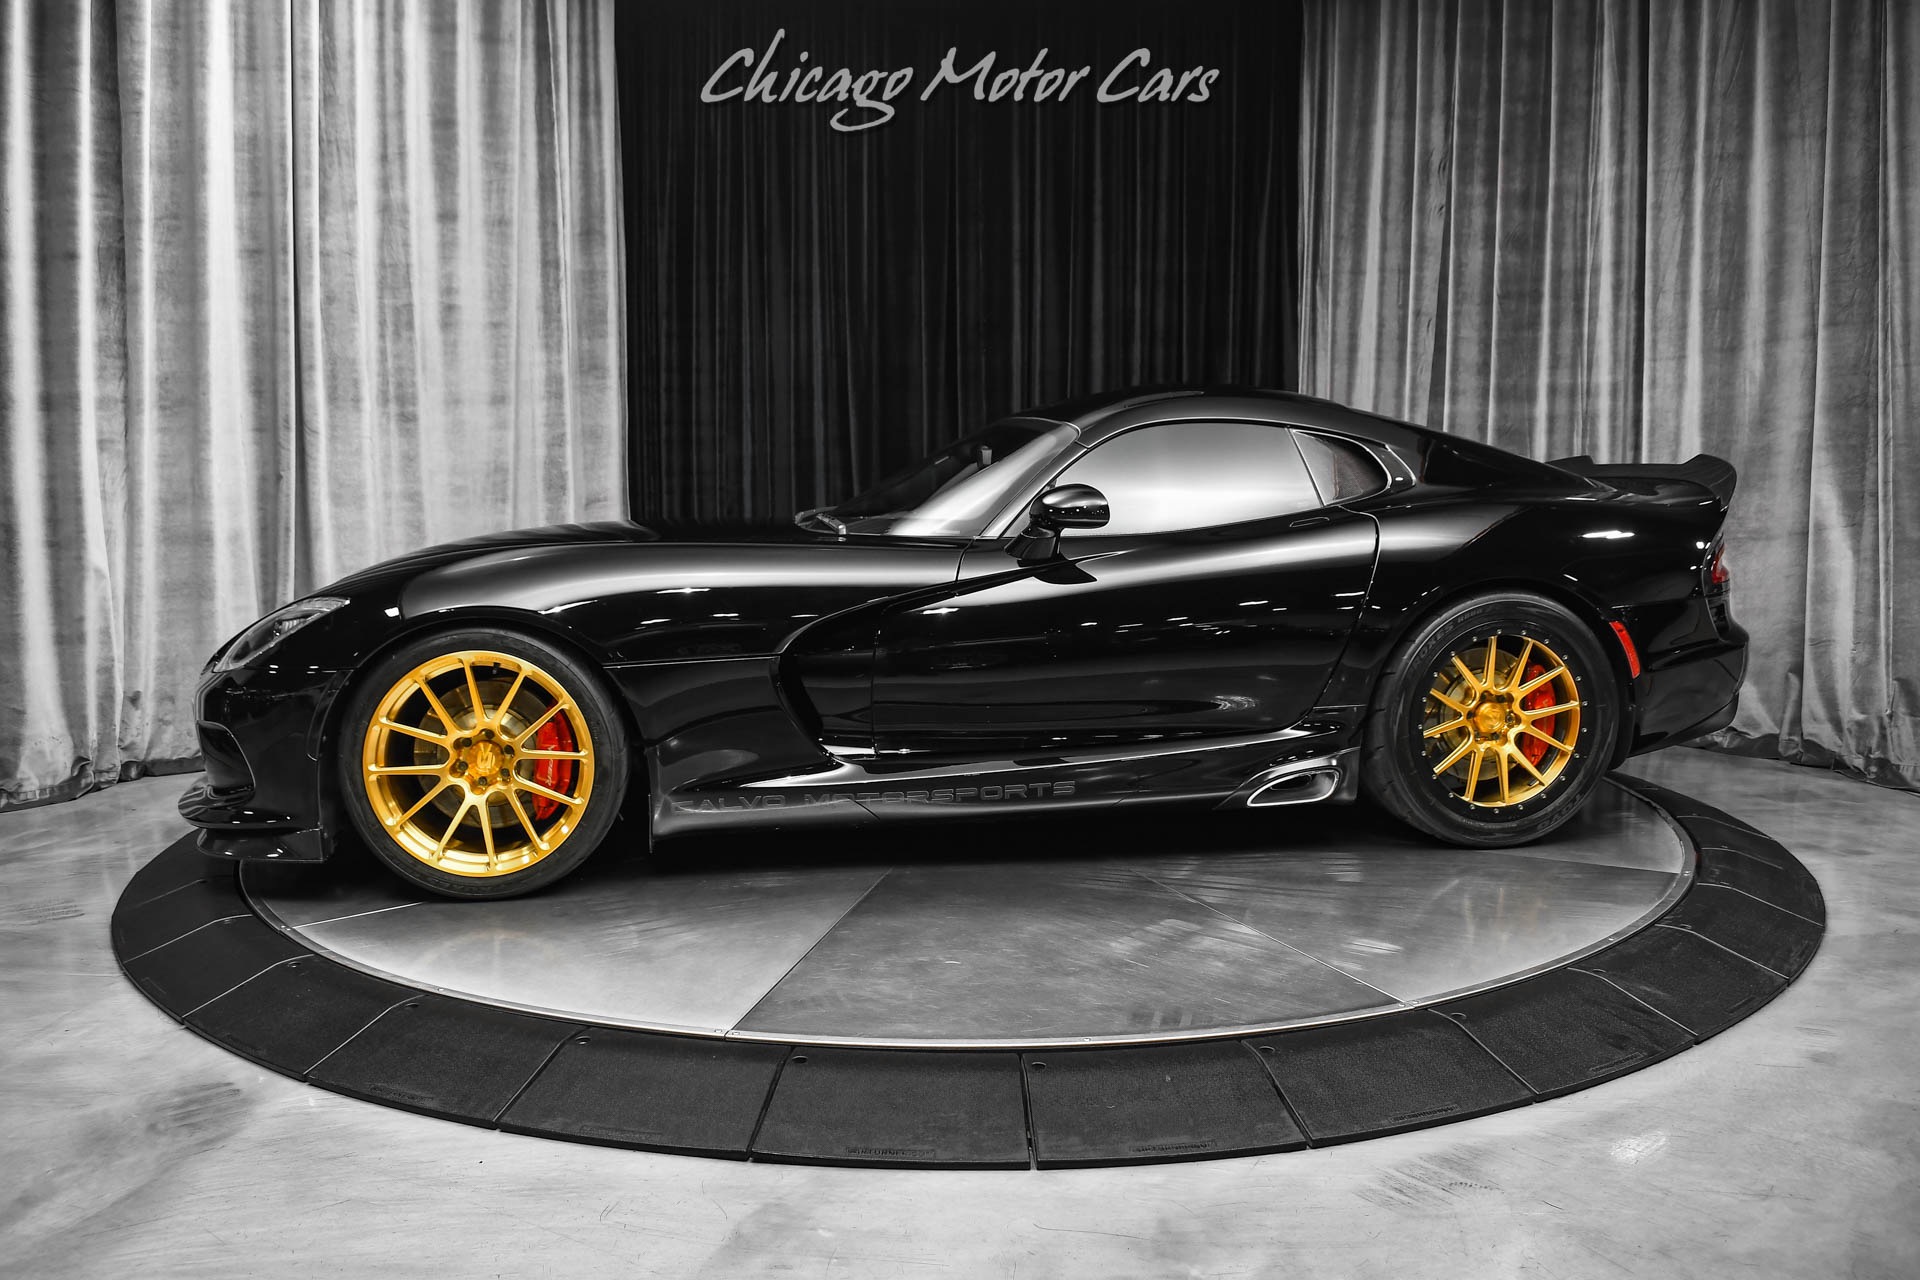 Used-2014-Dodge-SRT-Viper-GTS-Coupe-Calvo-1300-Package-Twin-Turbo-Only-6k-Miles-Upgraded-Wheels